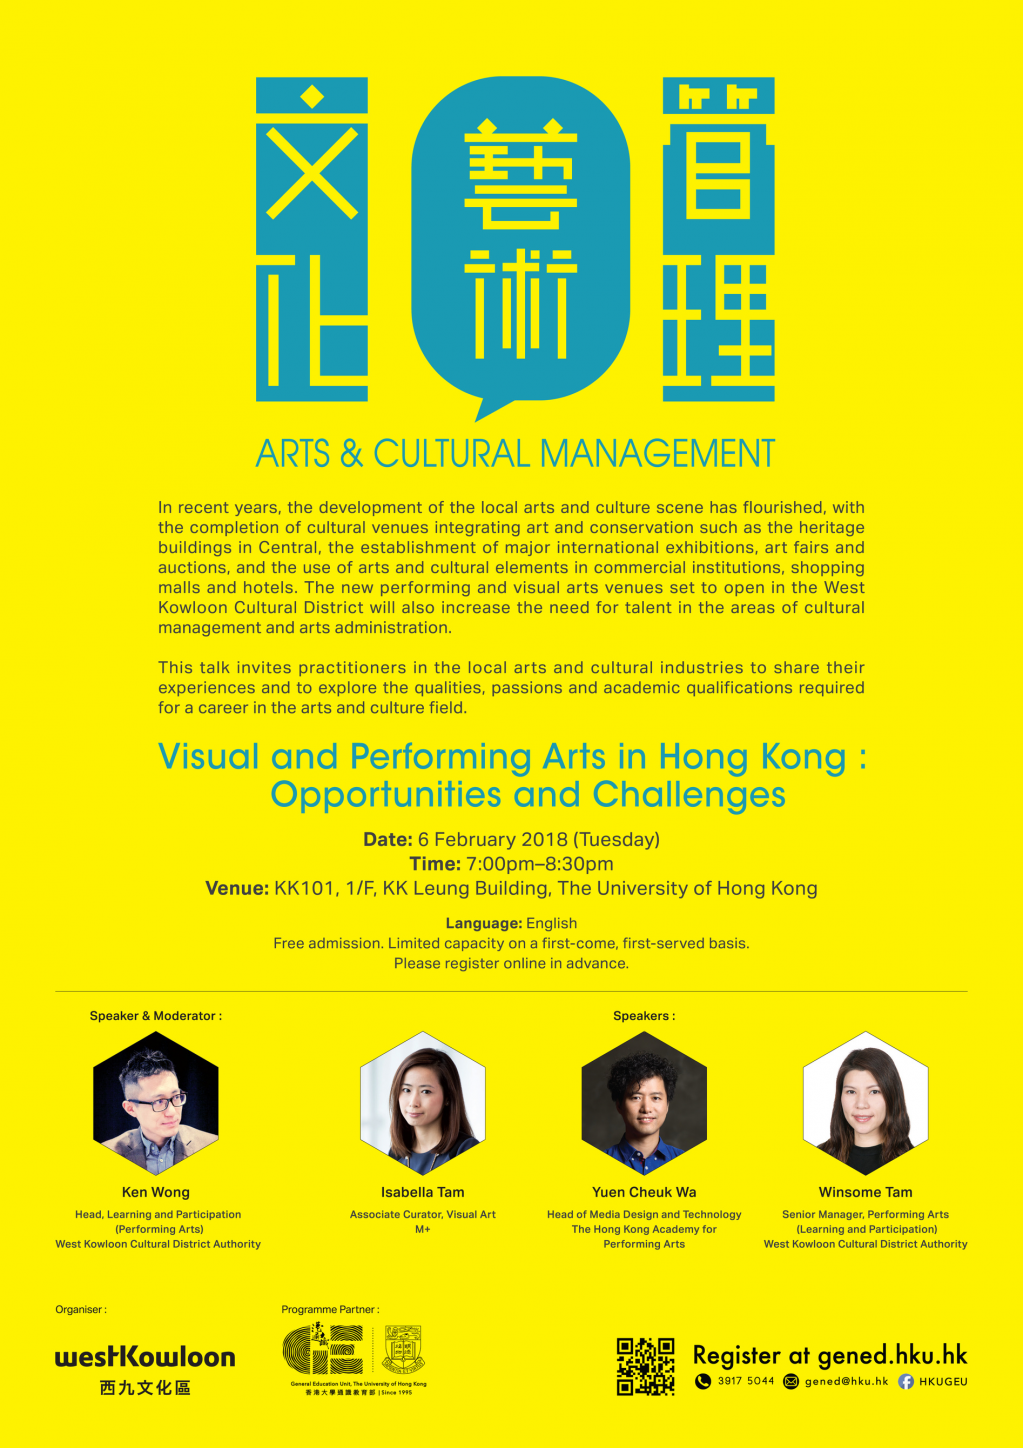 Visual and Performing Arts in Hong Kong: Opportunities and Challenges